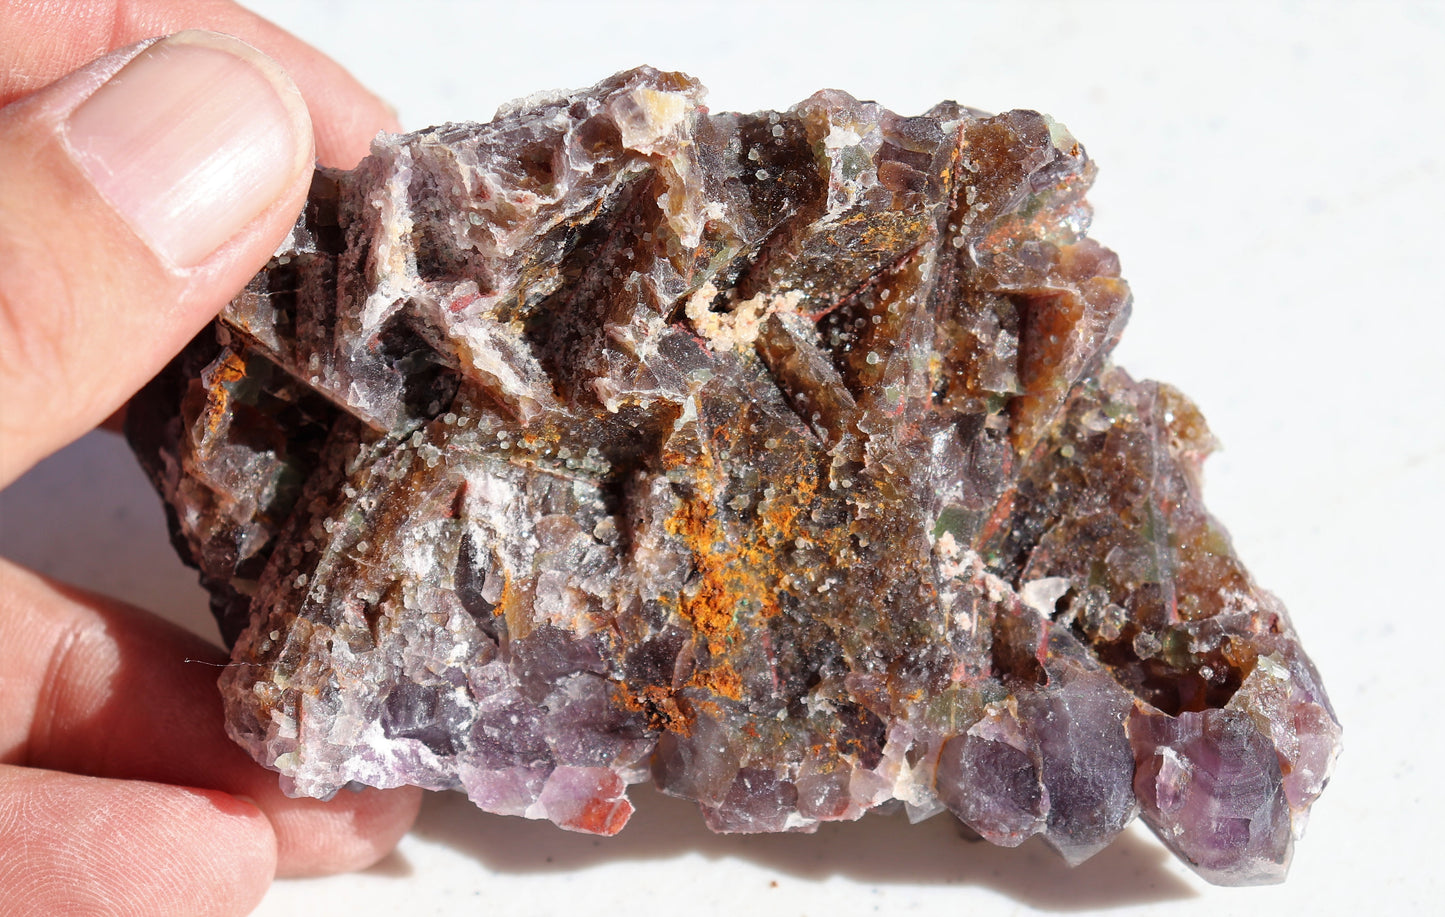 Nice Hematite-included Amethyst Cluster with Green Fluorite